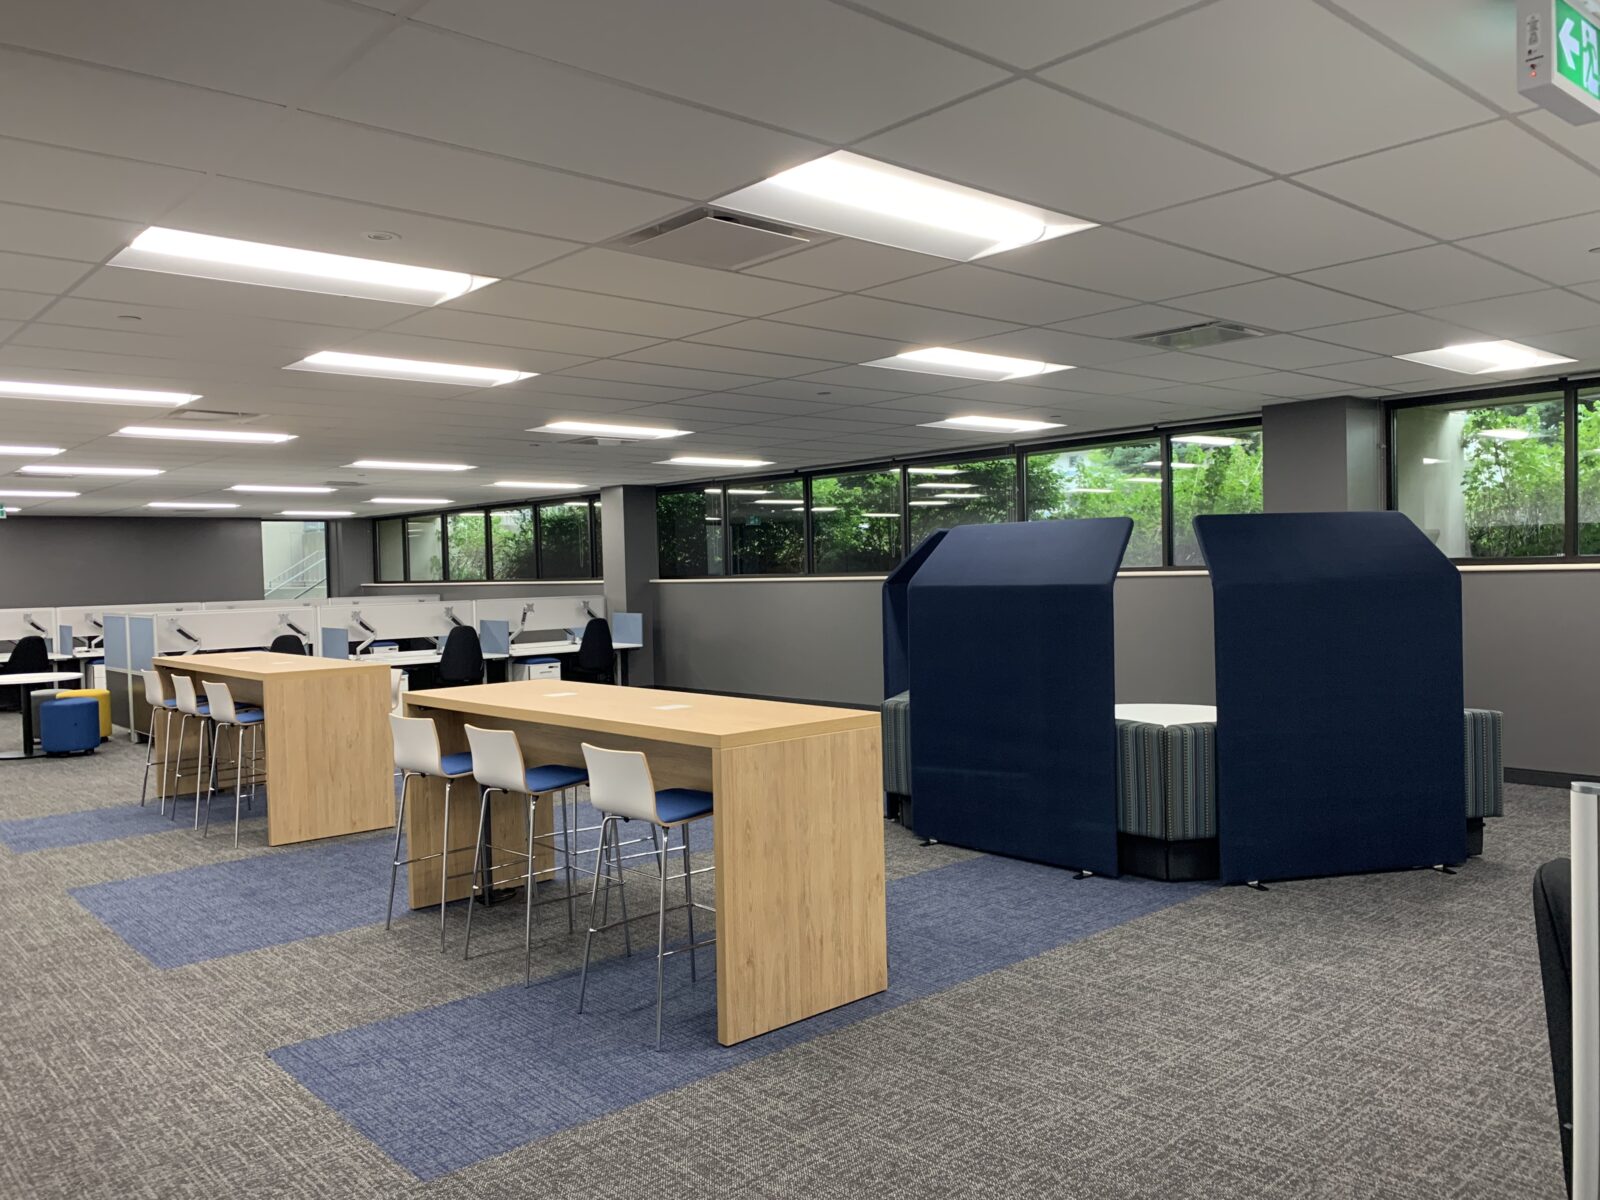 Interior office space showing bar-height collaboration spaces and individual workstations in the background